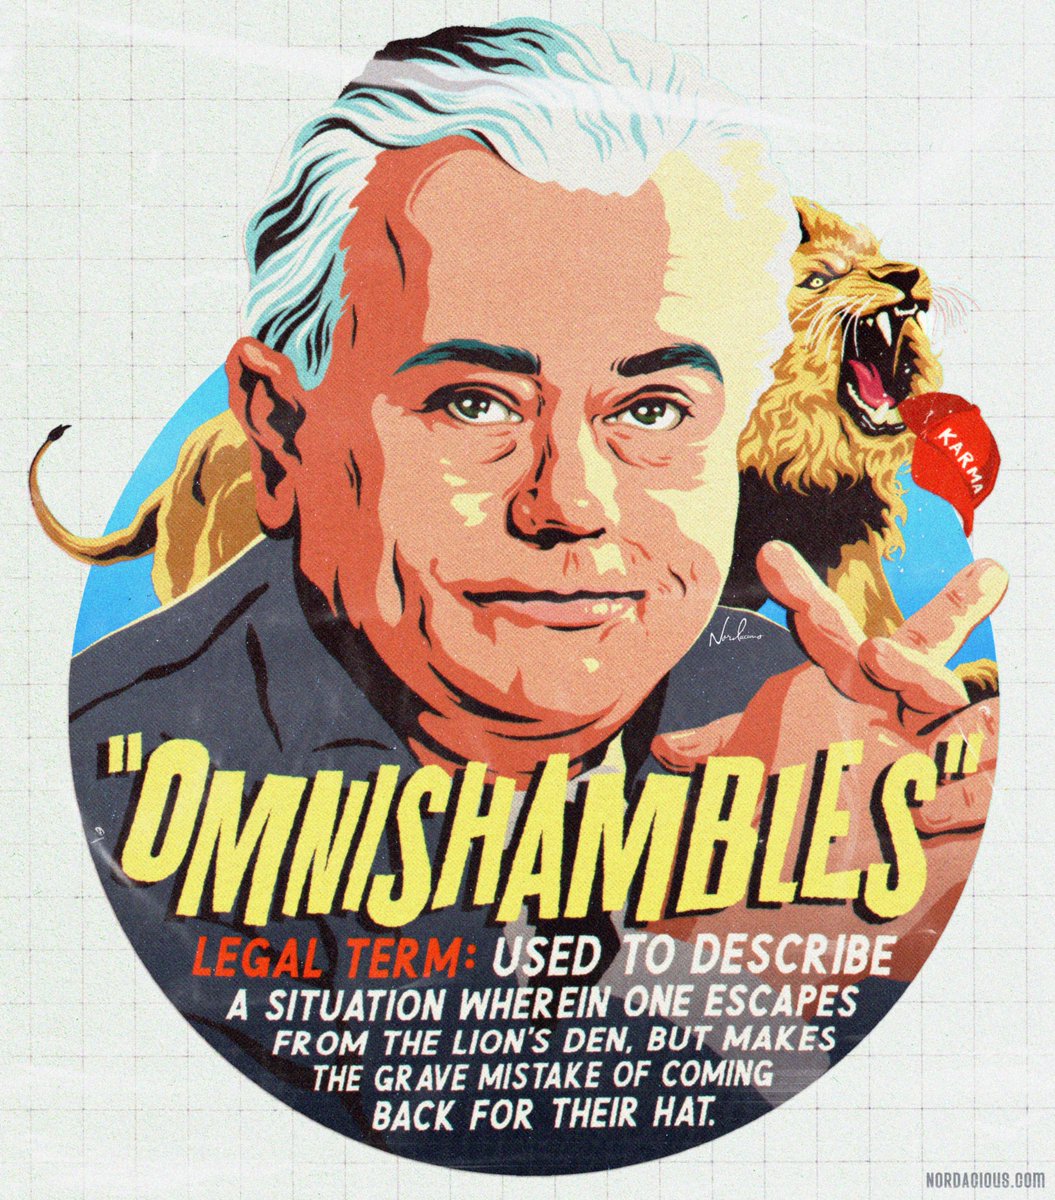 'OMNISHAMBLES' (noun) om·ni·sham·bles | Legal term used to describe a situation wherein one escapes from the lion's den, but makes the grave mistake of coming back for their hat | After an avalanche of requests -Justice Michael Lee 🤍 prints/tees: bit.ly/4aYDaAT